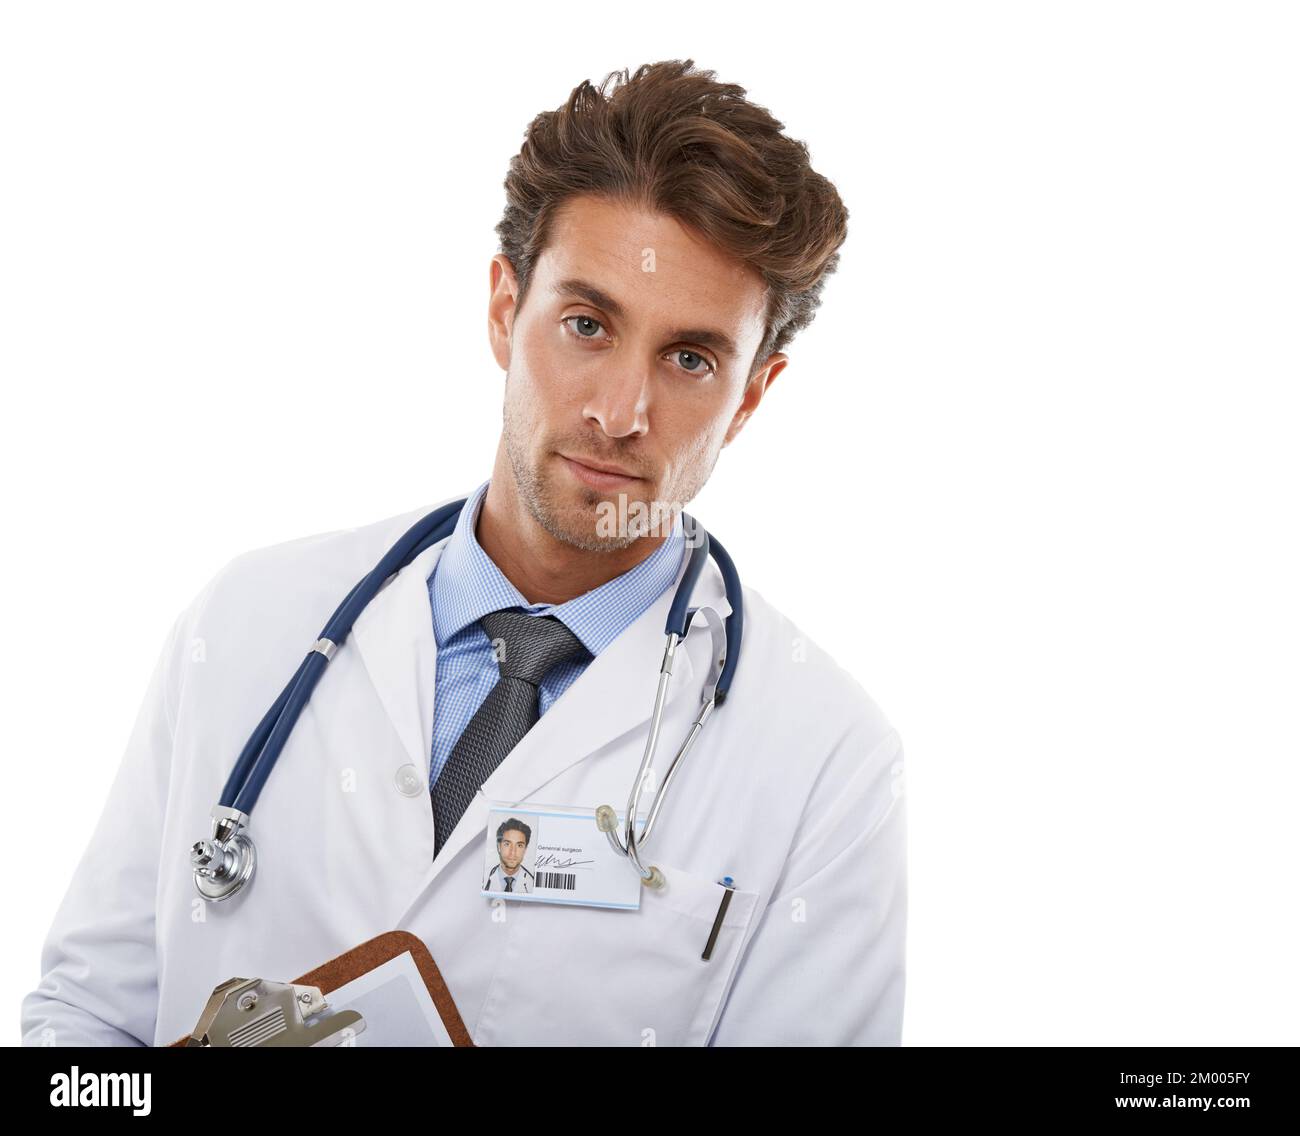 Hes serious about your wellbeing. Studio shot of a serious-looking young medical professional holding a clipboard. Stock Photo